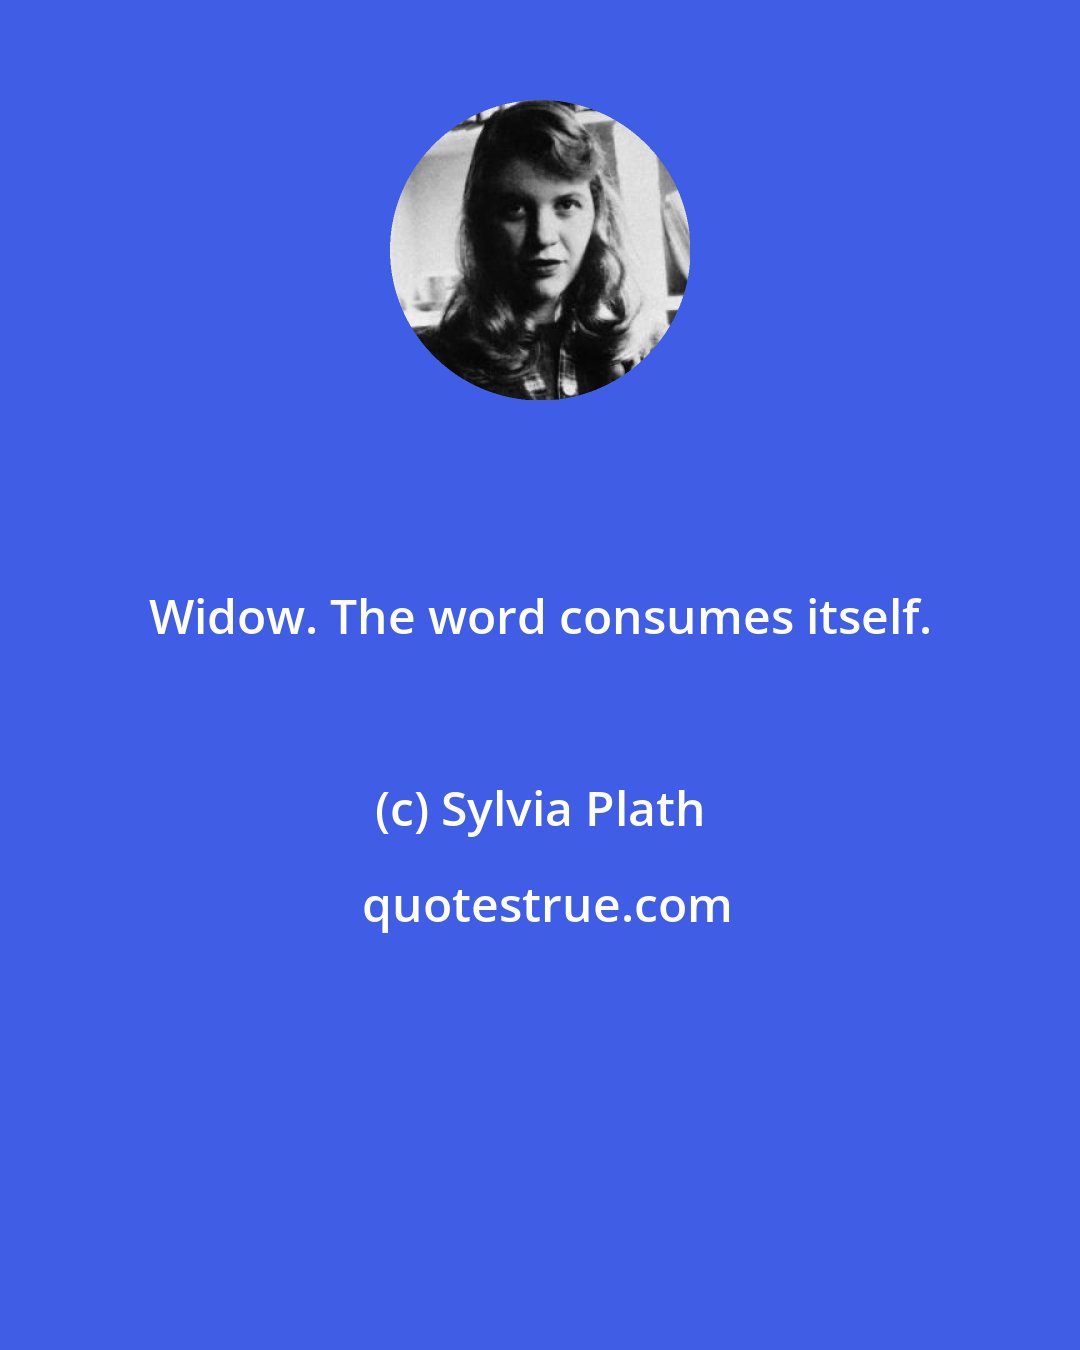 Sylvia Plath: Widow. The word consumes itself.